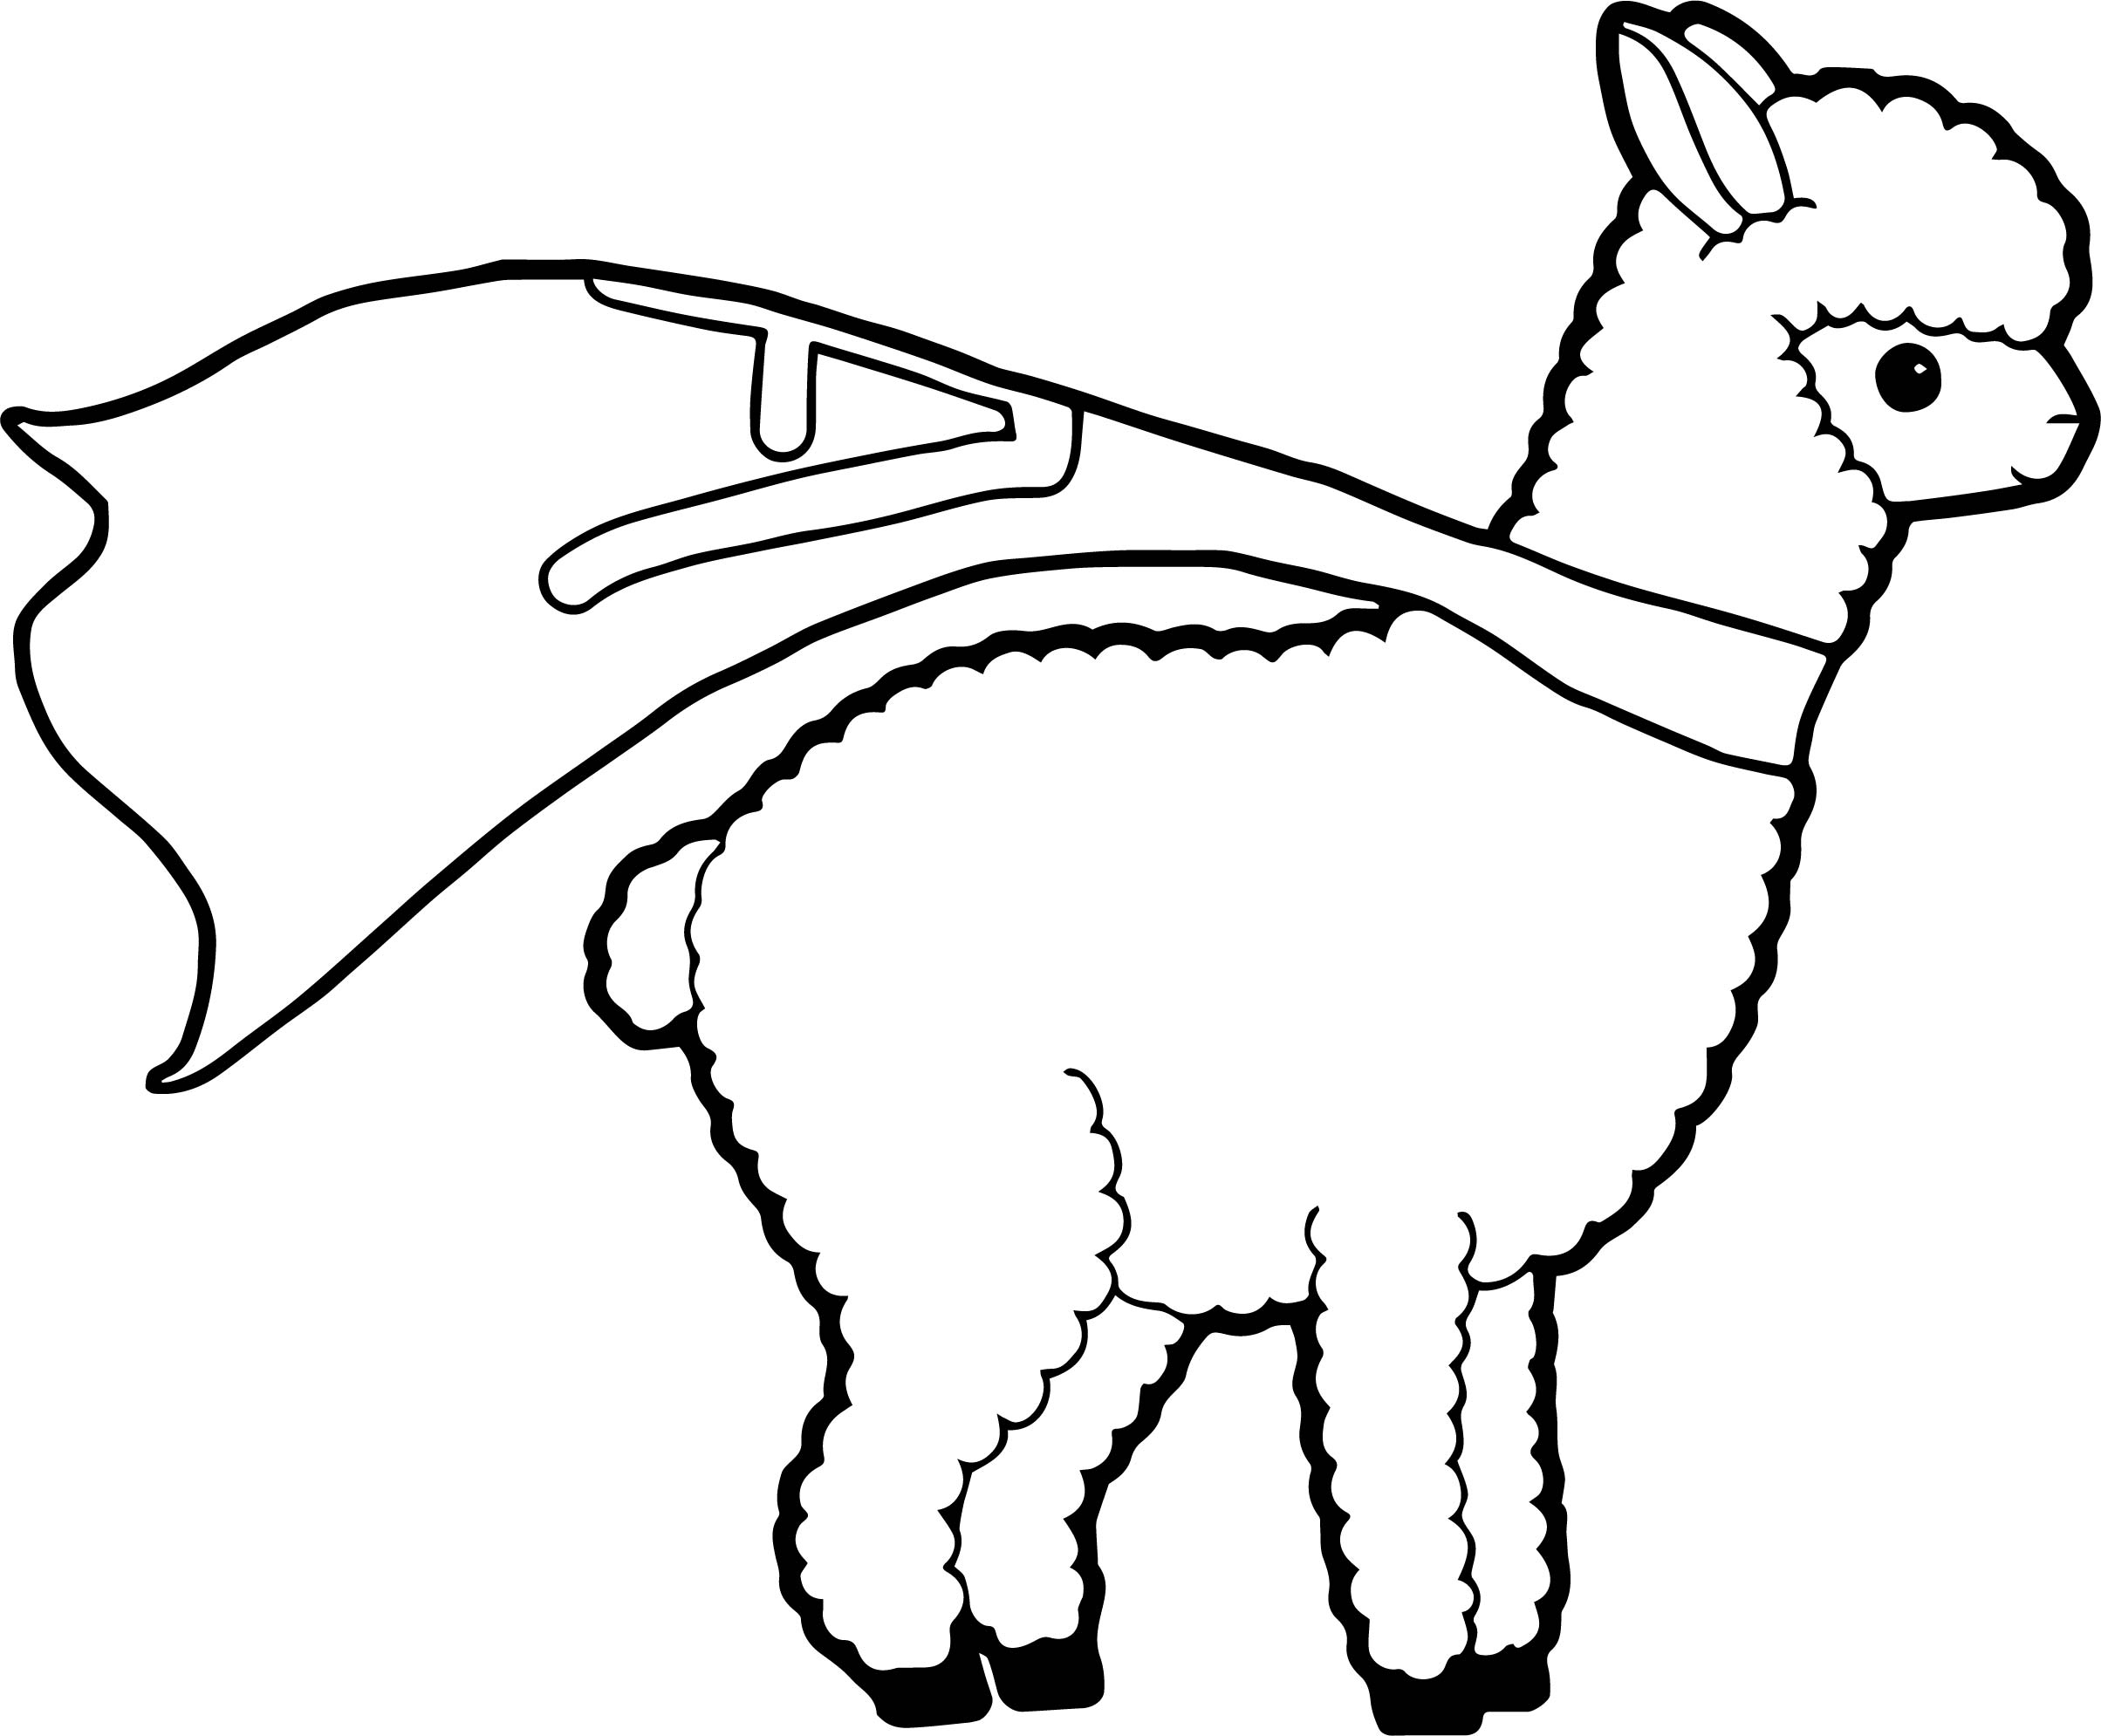 2408x1990 delightedama coloring pages gallery documentation template - fortnite llama printable template